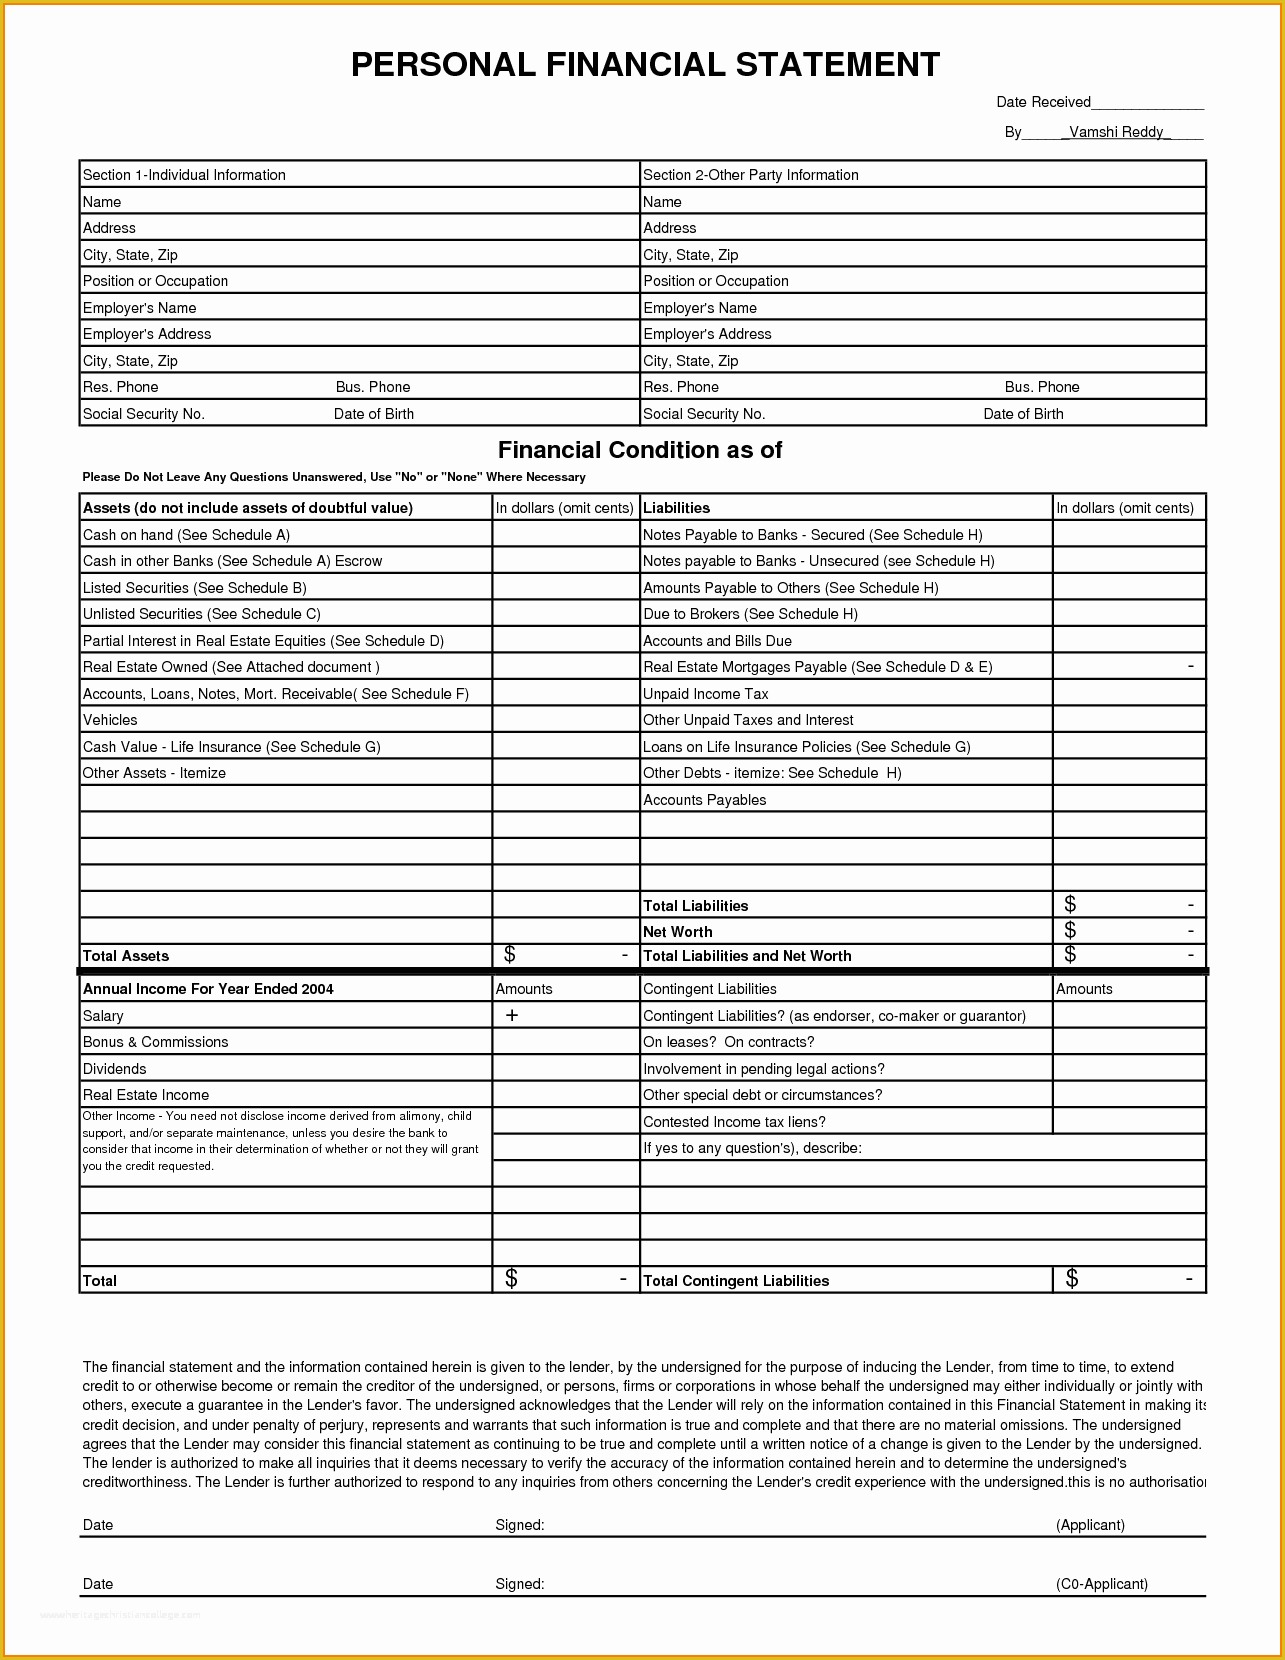 Financial Statement Excel Template Free Download Of 13 Personal Financial Statement form Free